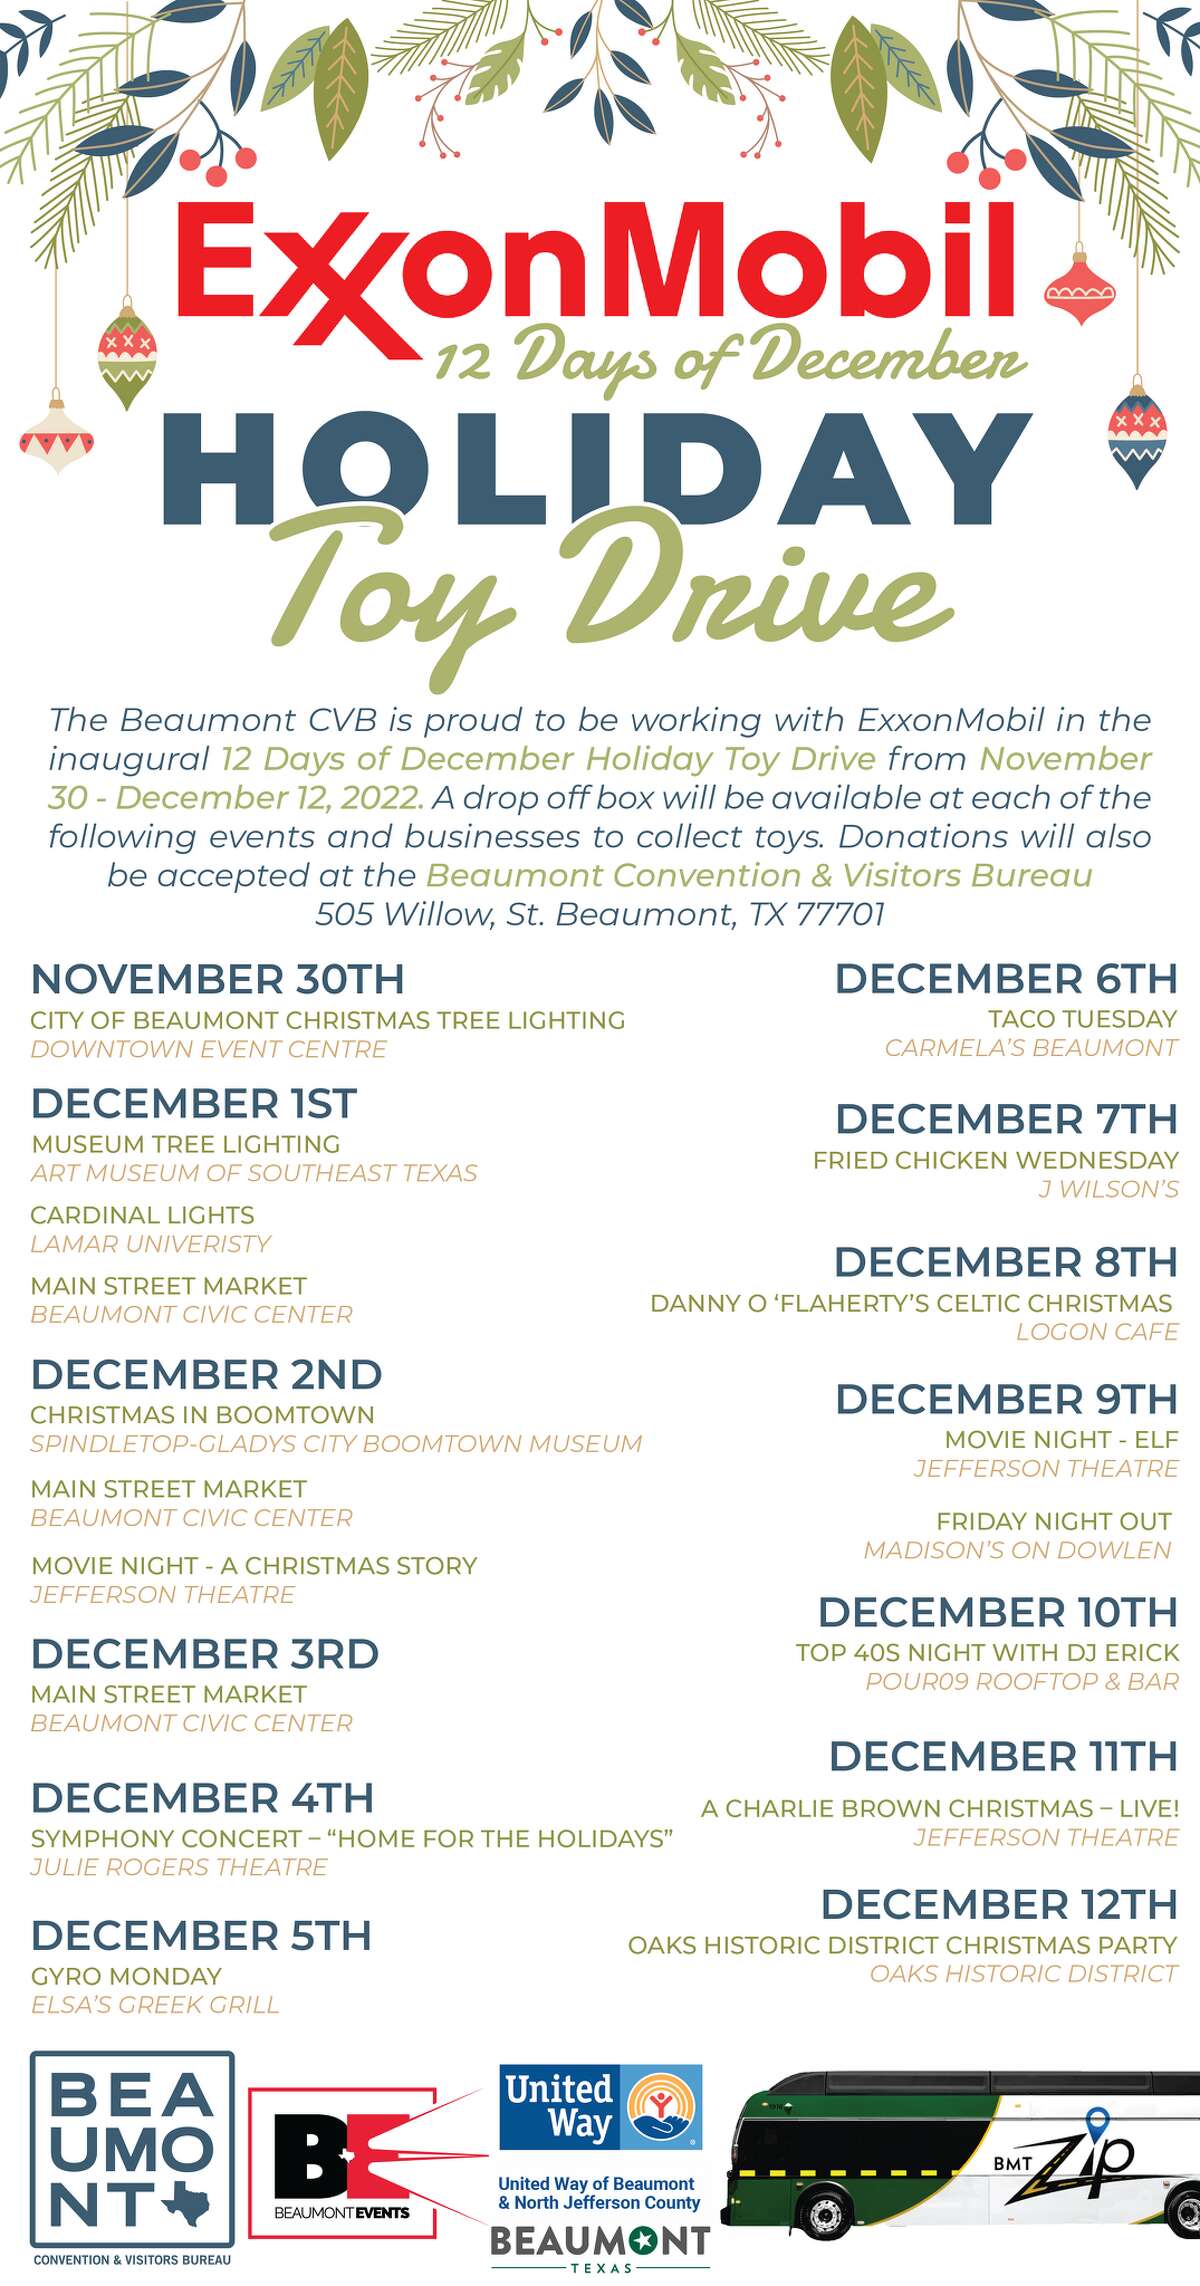 ExxonMobil and Beaumont Convention and Visitors Bureau partnered to host the 12 Days of December Holiday Toy Drive.